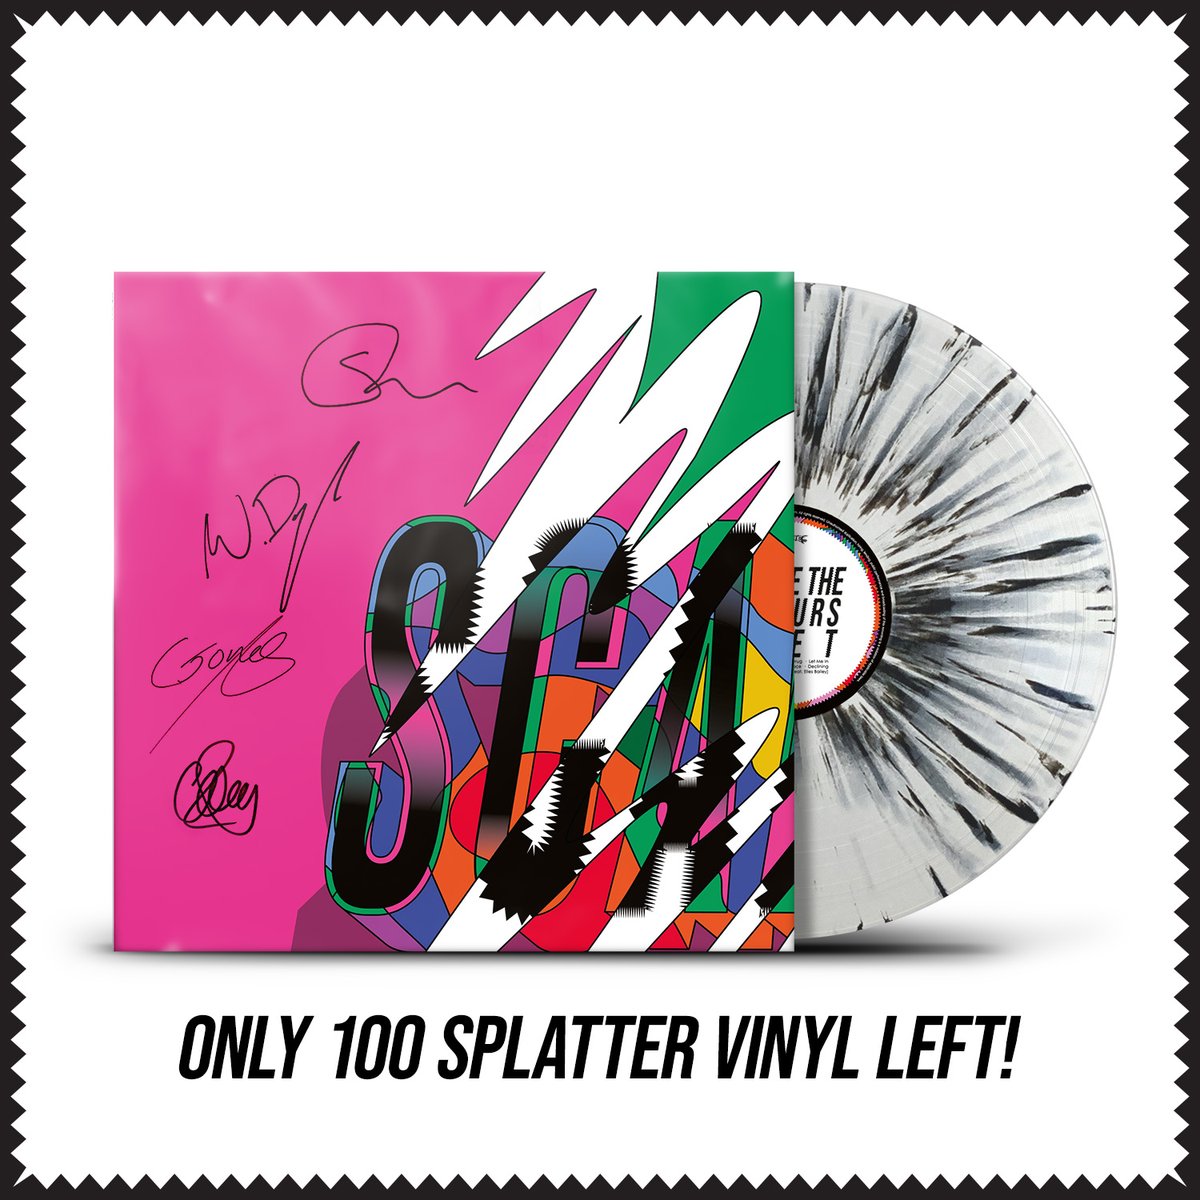 Heads up!🚨 This signed splatter vinyl edition of @ScarletRebels' new album 'Where The Colours Meet' now has less than 100 copies left! Pre-order your copy as part of a download bundle at earache.com/scarletrebels and get the new single 'Grace' for instant download, too! 🤩